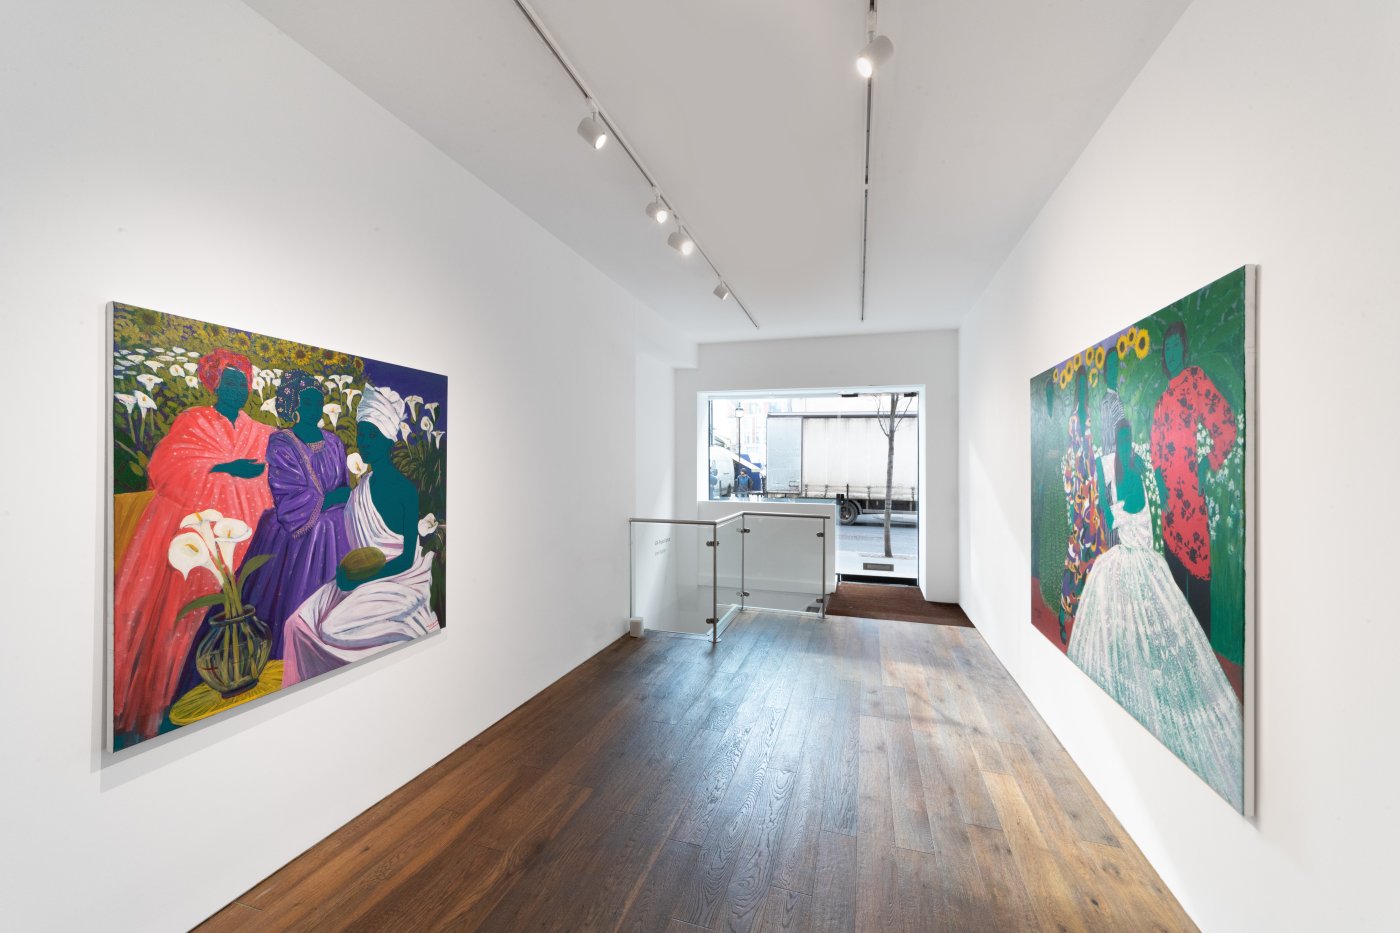 Installation image for Dawit Adnew: Woven Moments, at Addis Fine Art